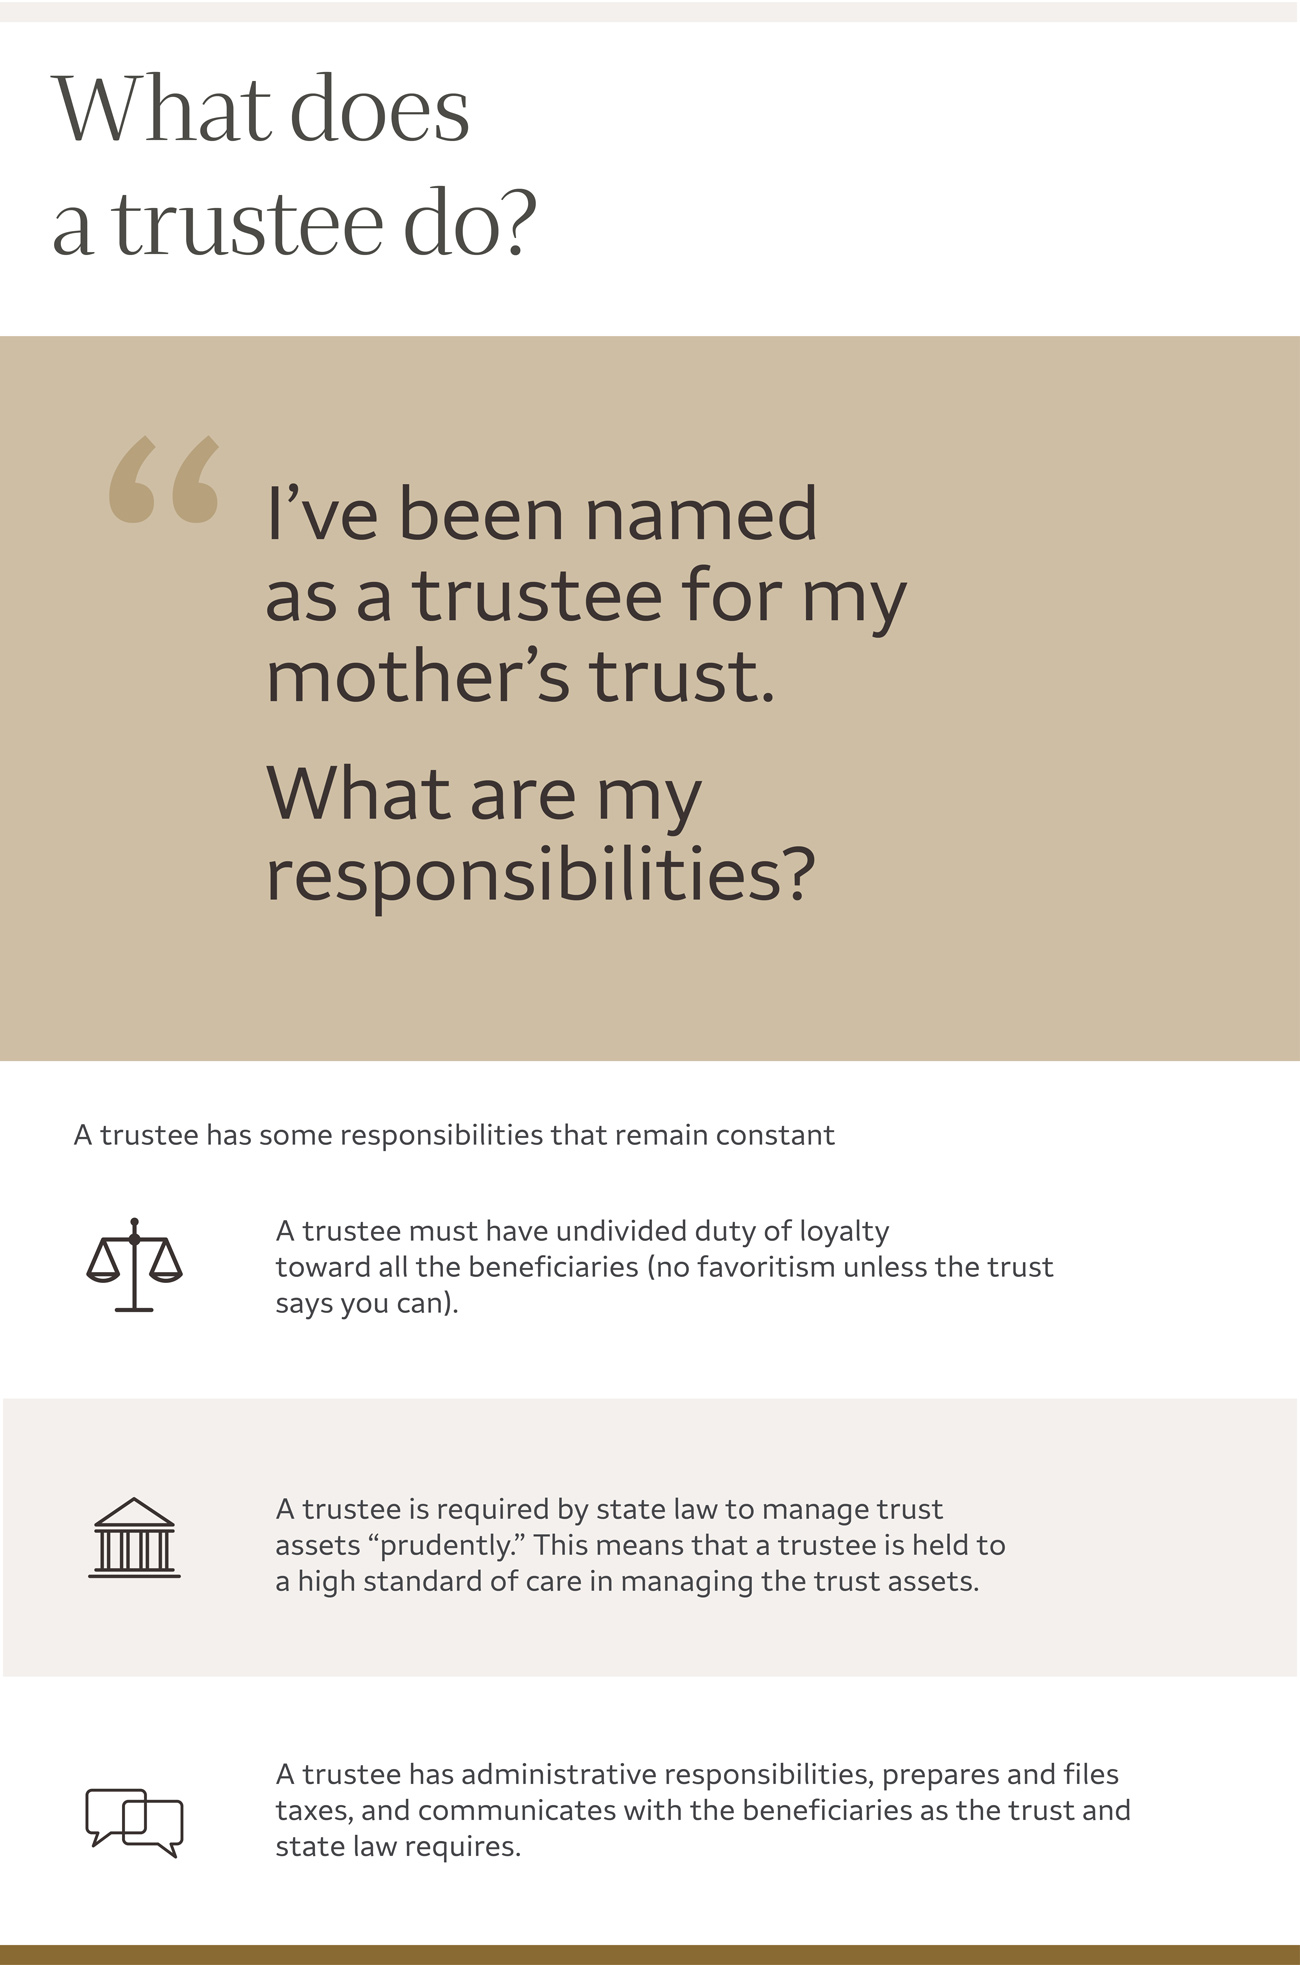 Infographic outlining what a trustee does. For details, click "view text alternative."